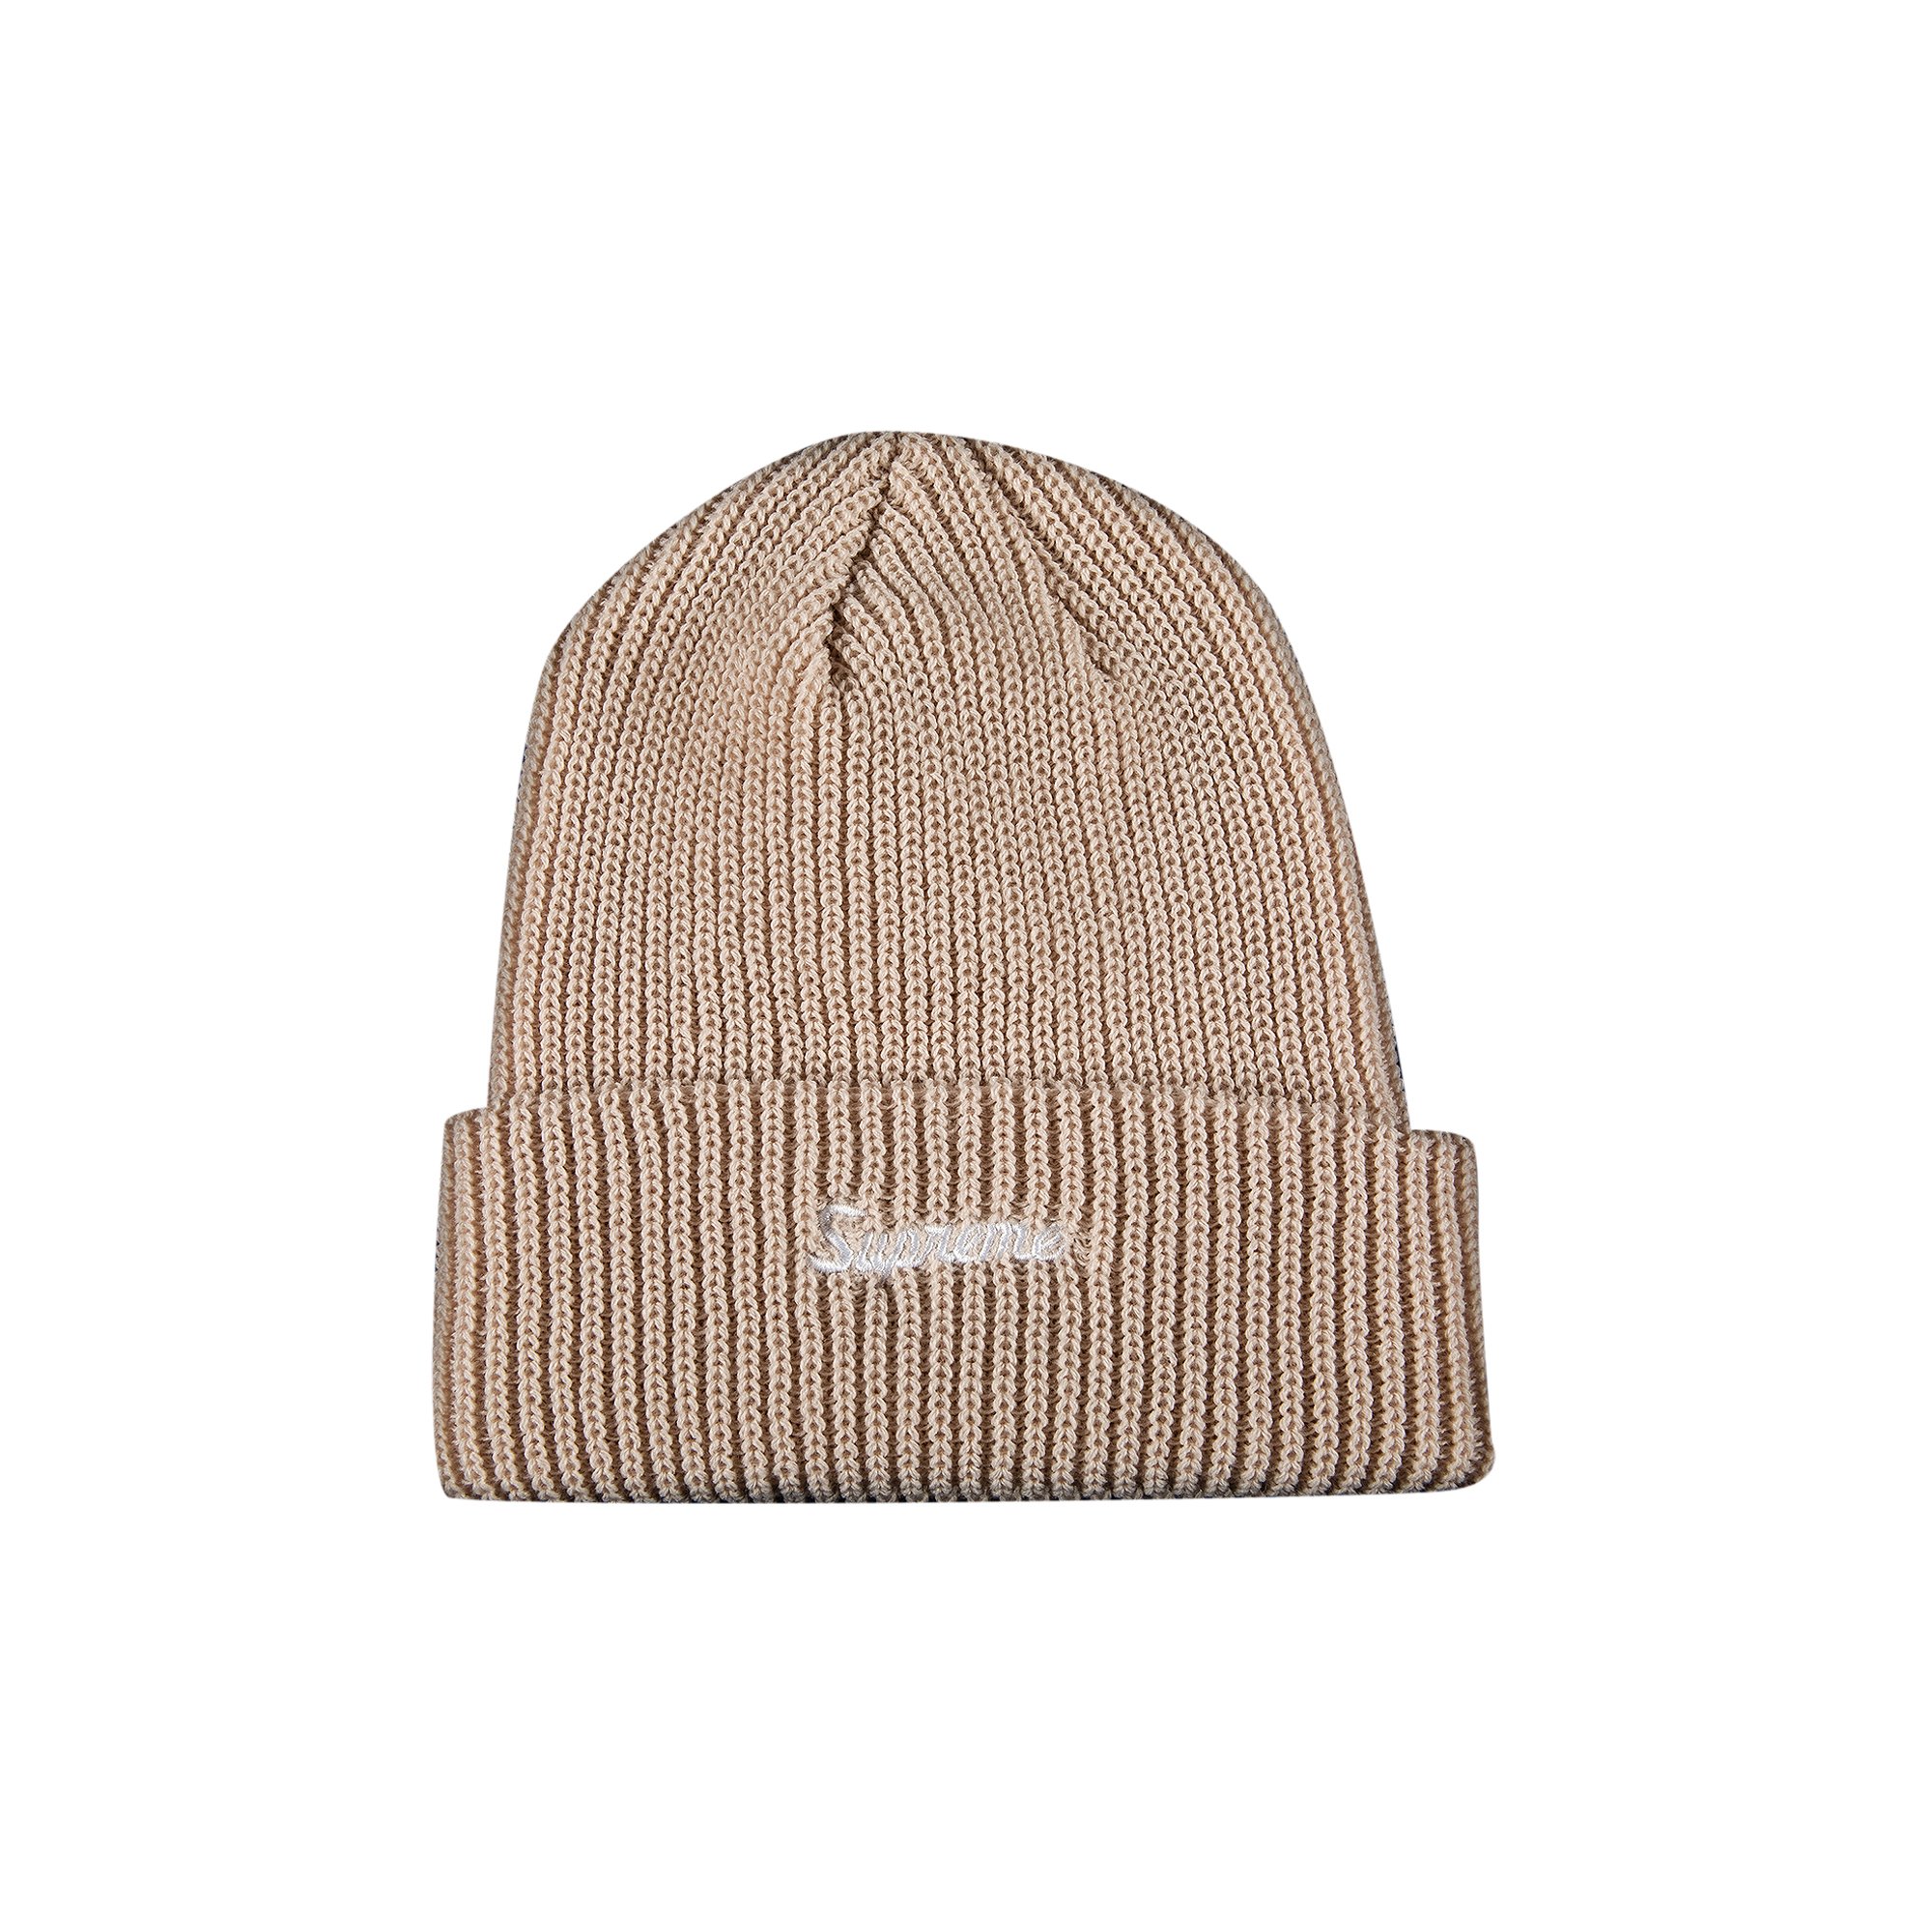 Buy Supreme Loose Gauge Beanie 'Taupe' - FW21BN12 TAUPE | GOAT